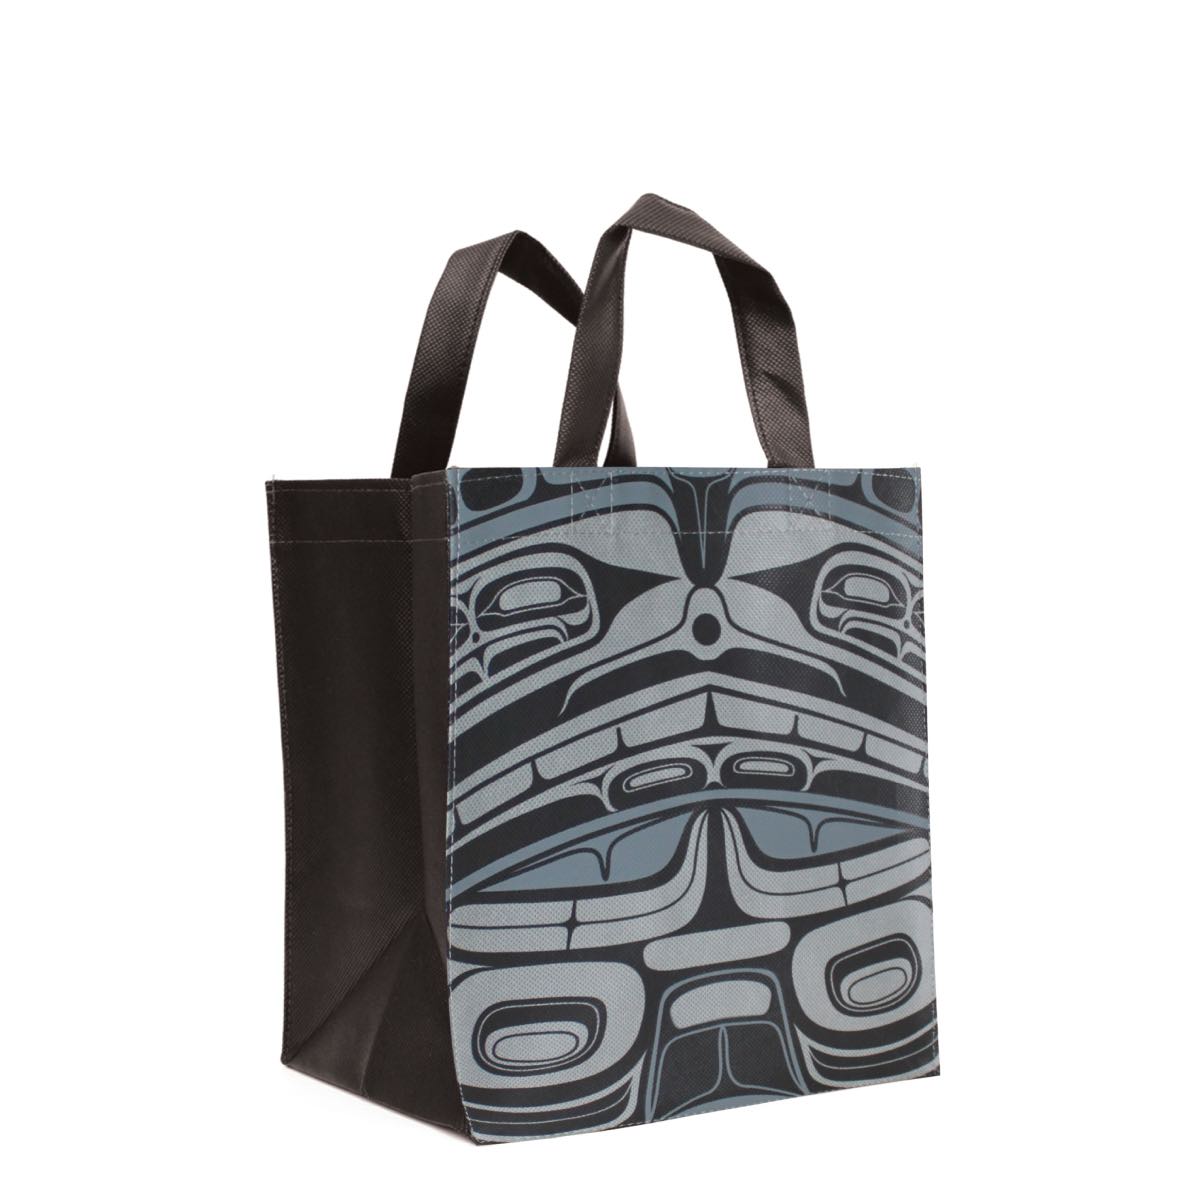 Eco Bag Small Preserving - Eco Bag Small Preserving -  - House of Himwitsa Native Art Gallery and Gifts